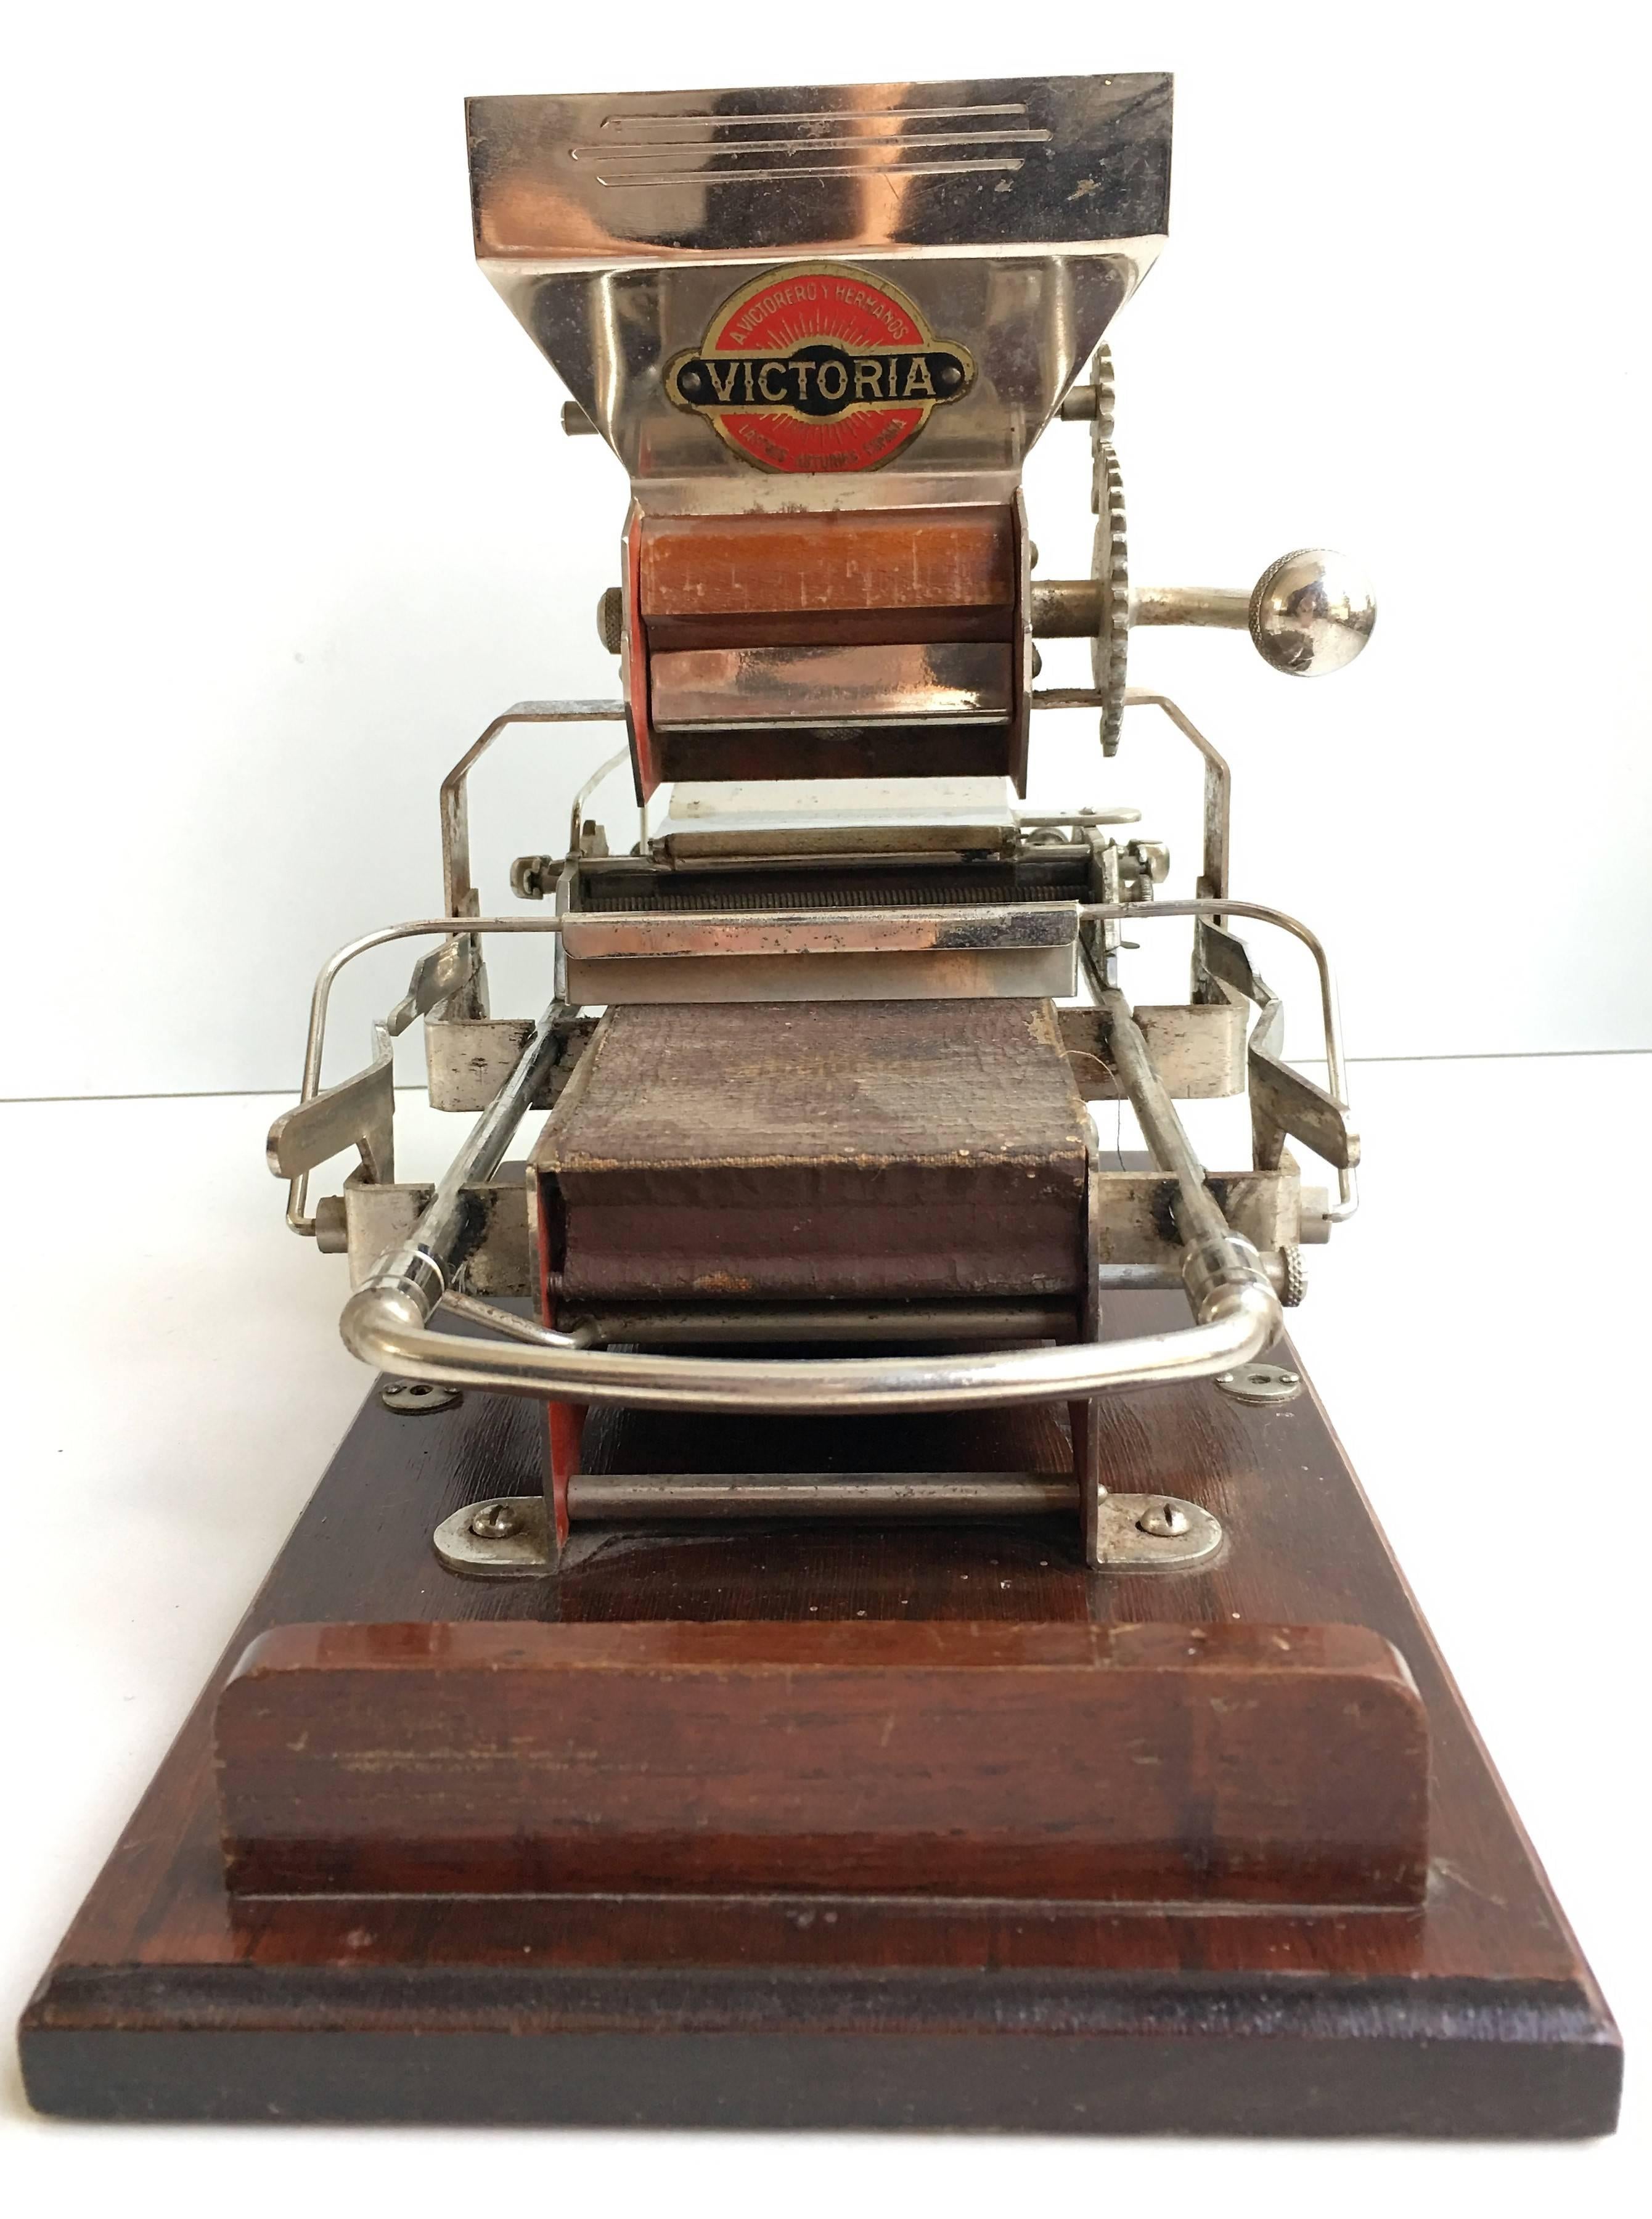 Art Deco 1920 Vintage Automatic Machine for Rolling Tobacco